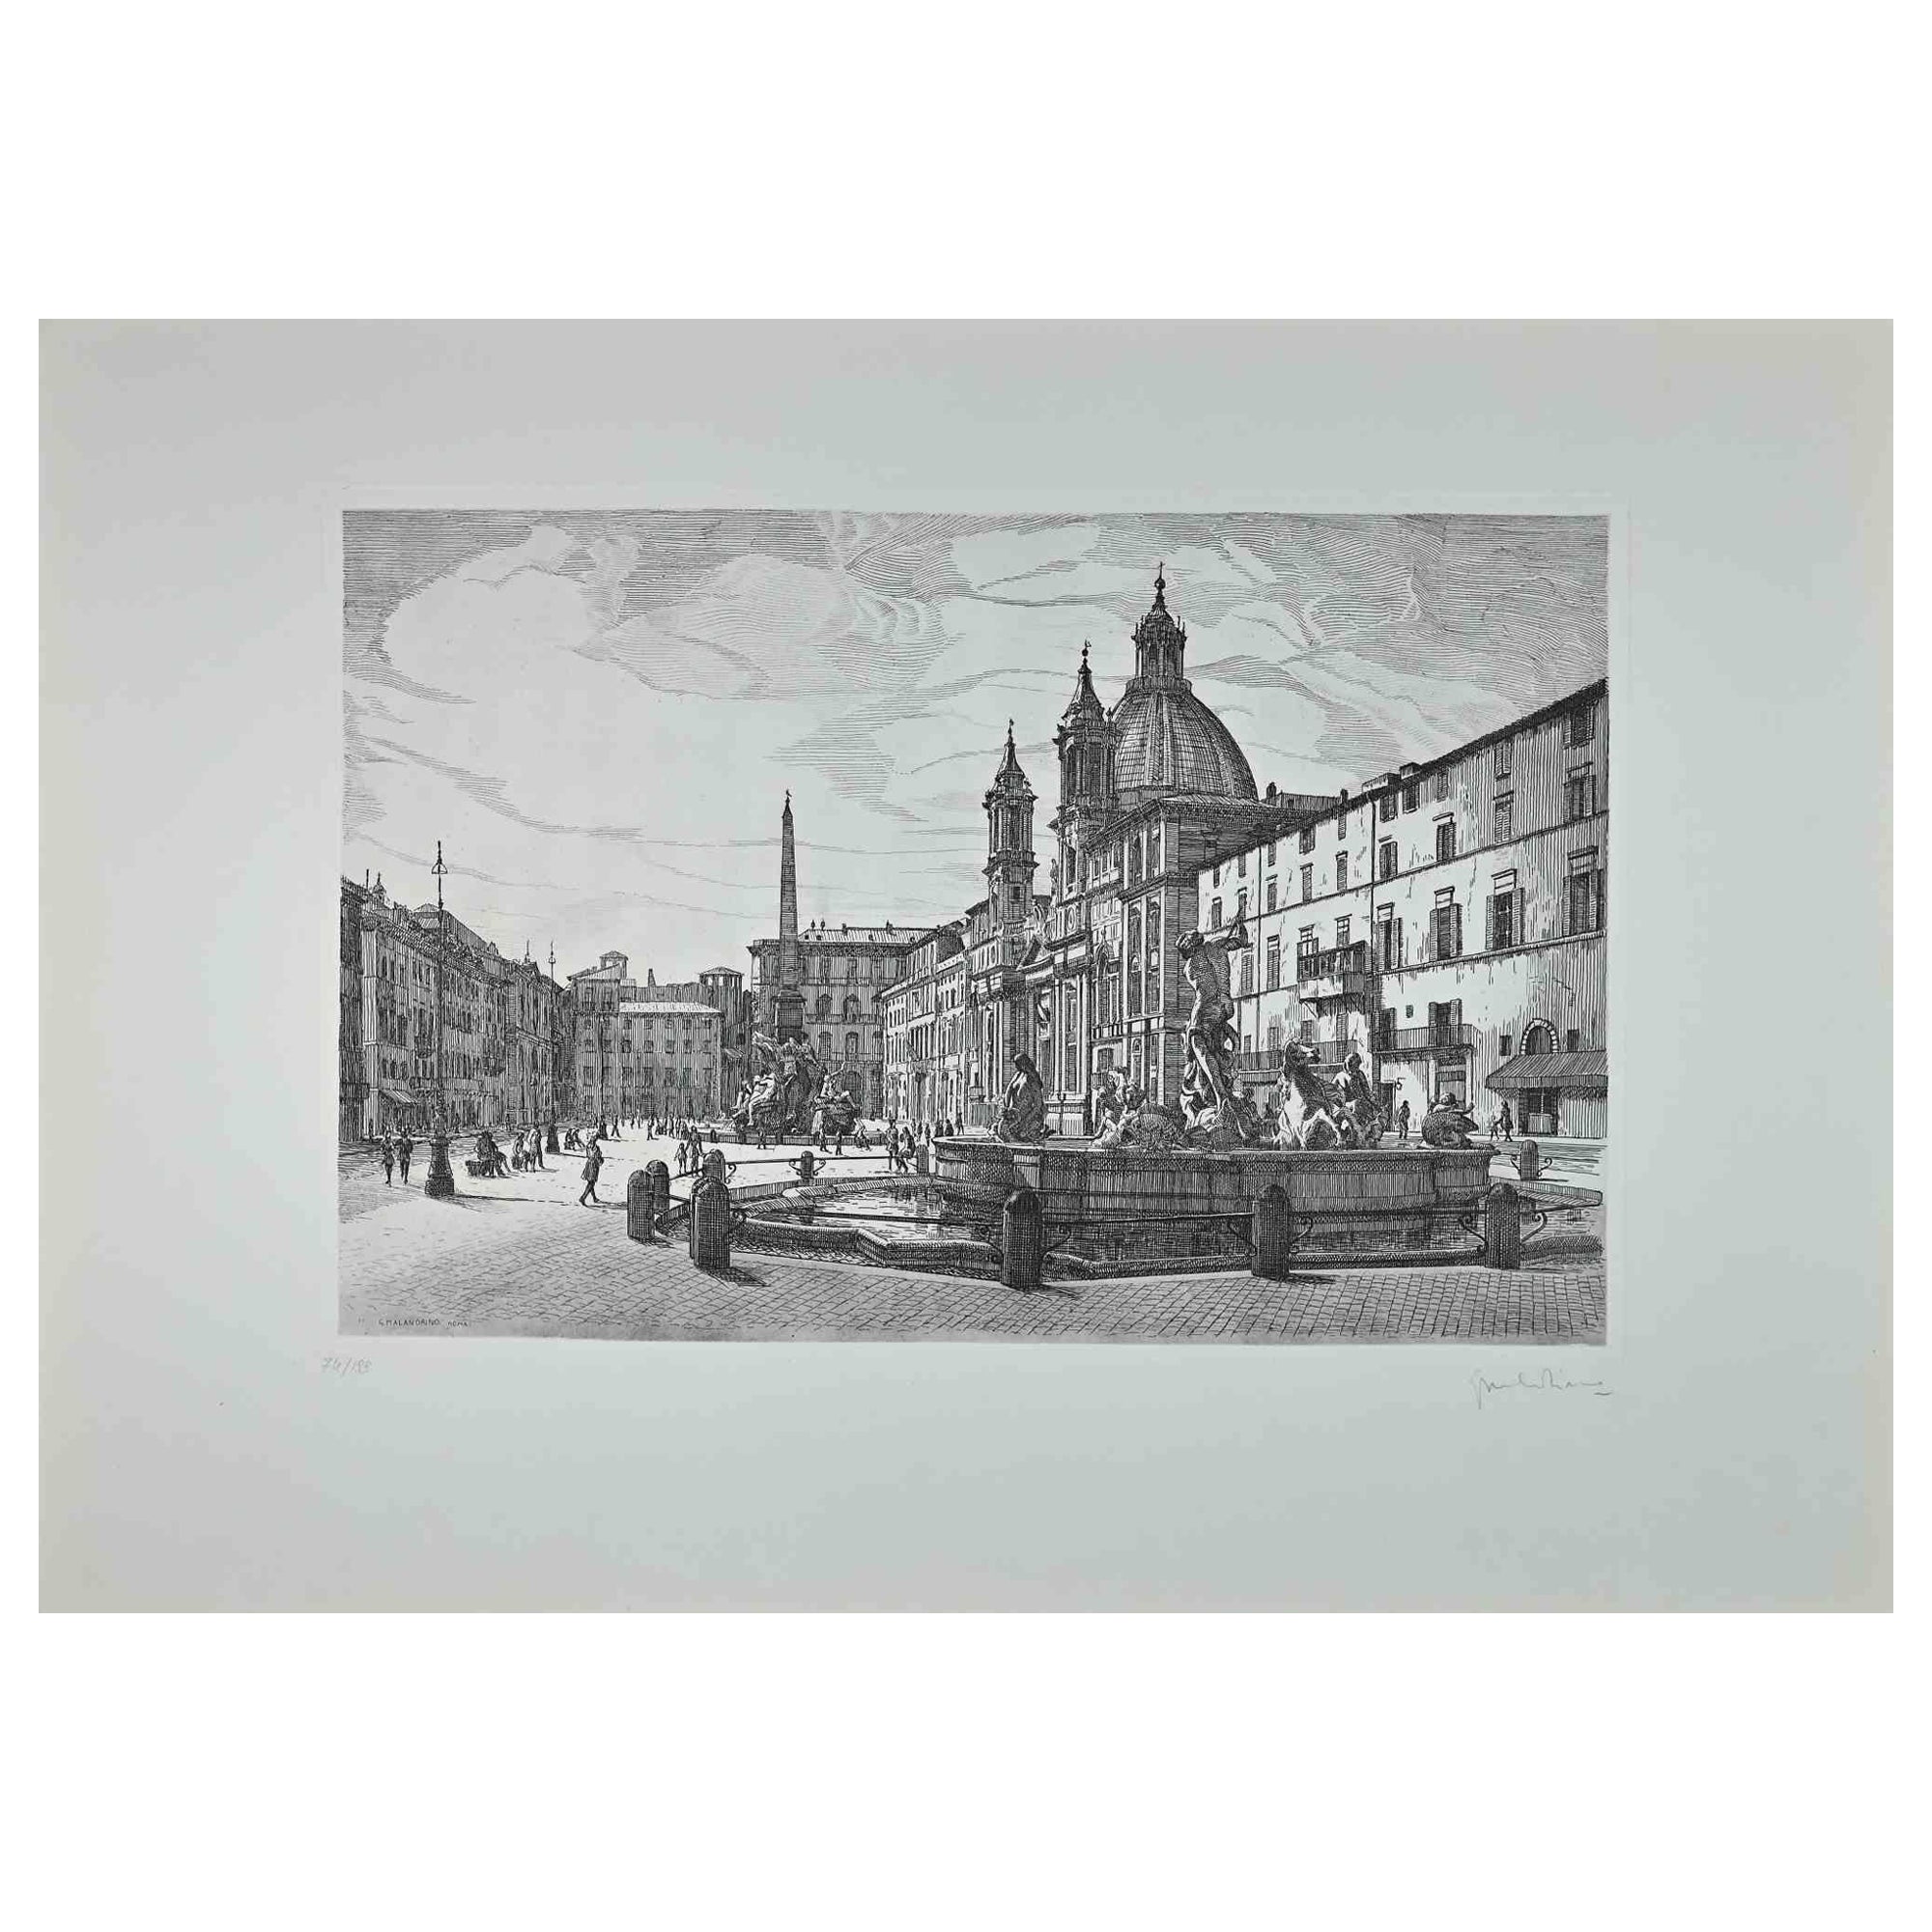 View of Piazza Navona is an original contemporary artwork realized in 1970 by the Italian artist Giuseppe Malandrino  (Modica, 1910 - Rome, 1979).
 
Etching on cardboard.
 
Hand-signed in pencil on the lower right corner.  Numbered on the lower-left